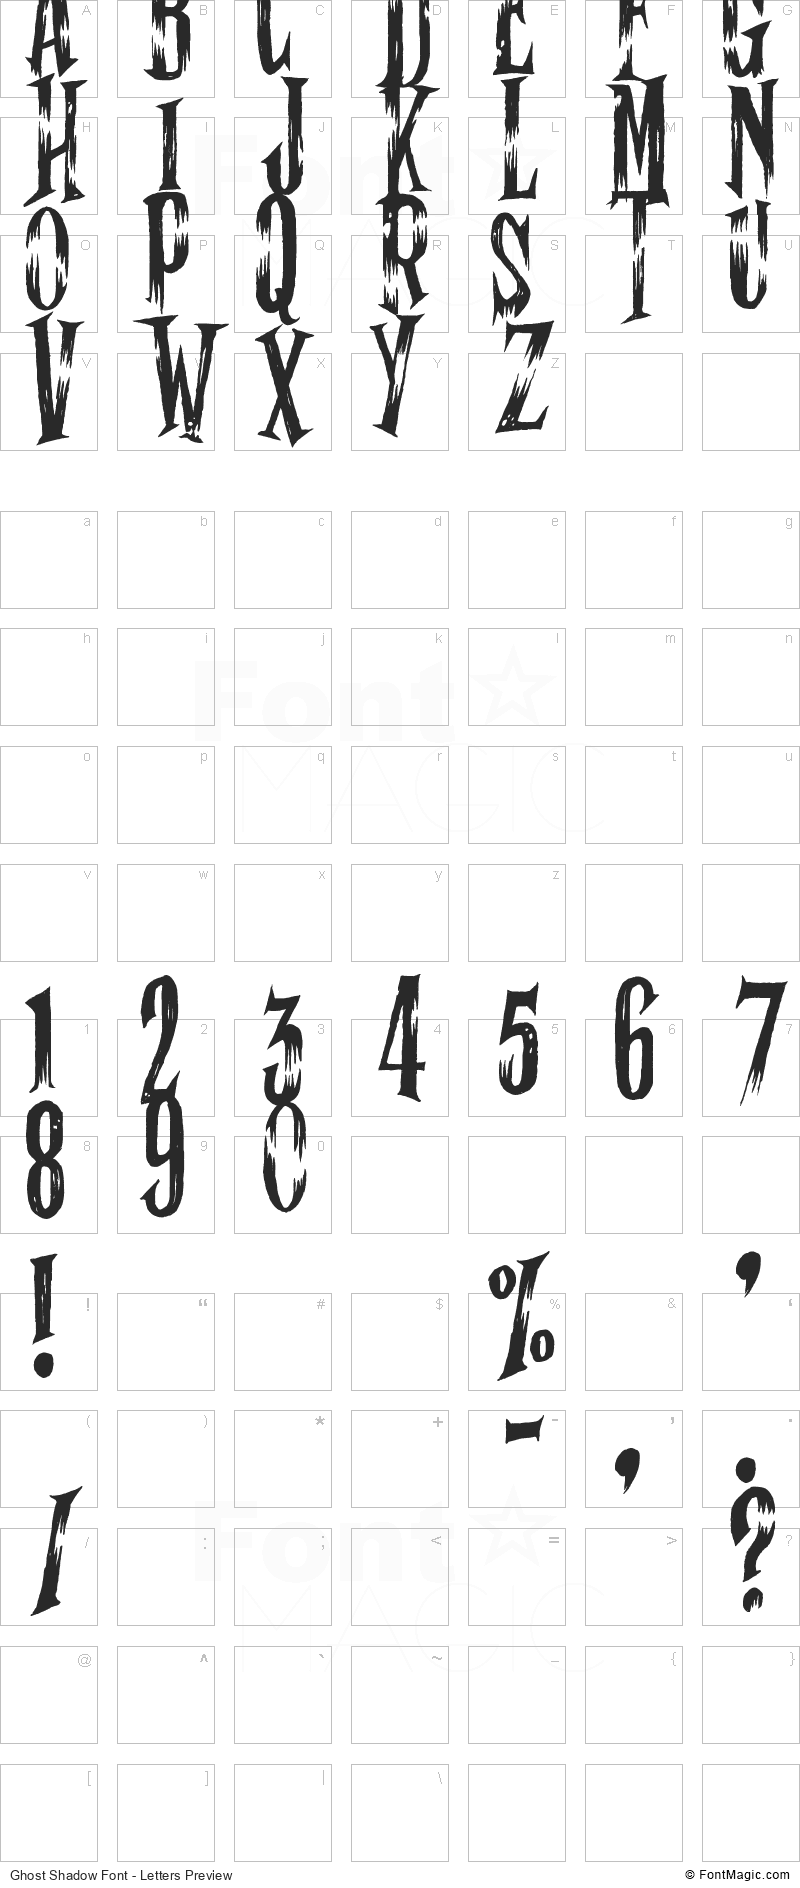 Ghost Shadow Font - All Latters Preview Chart